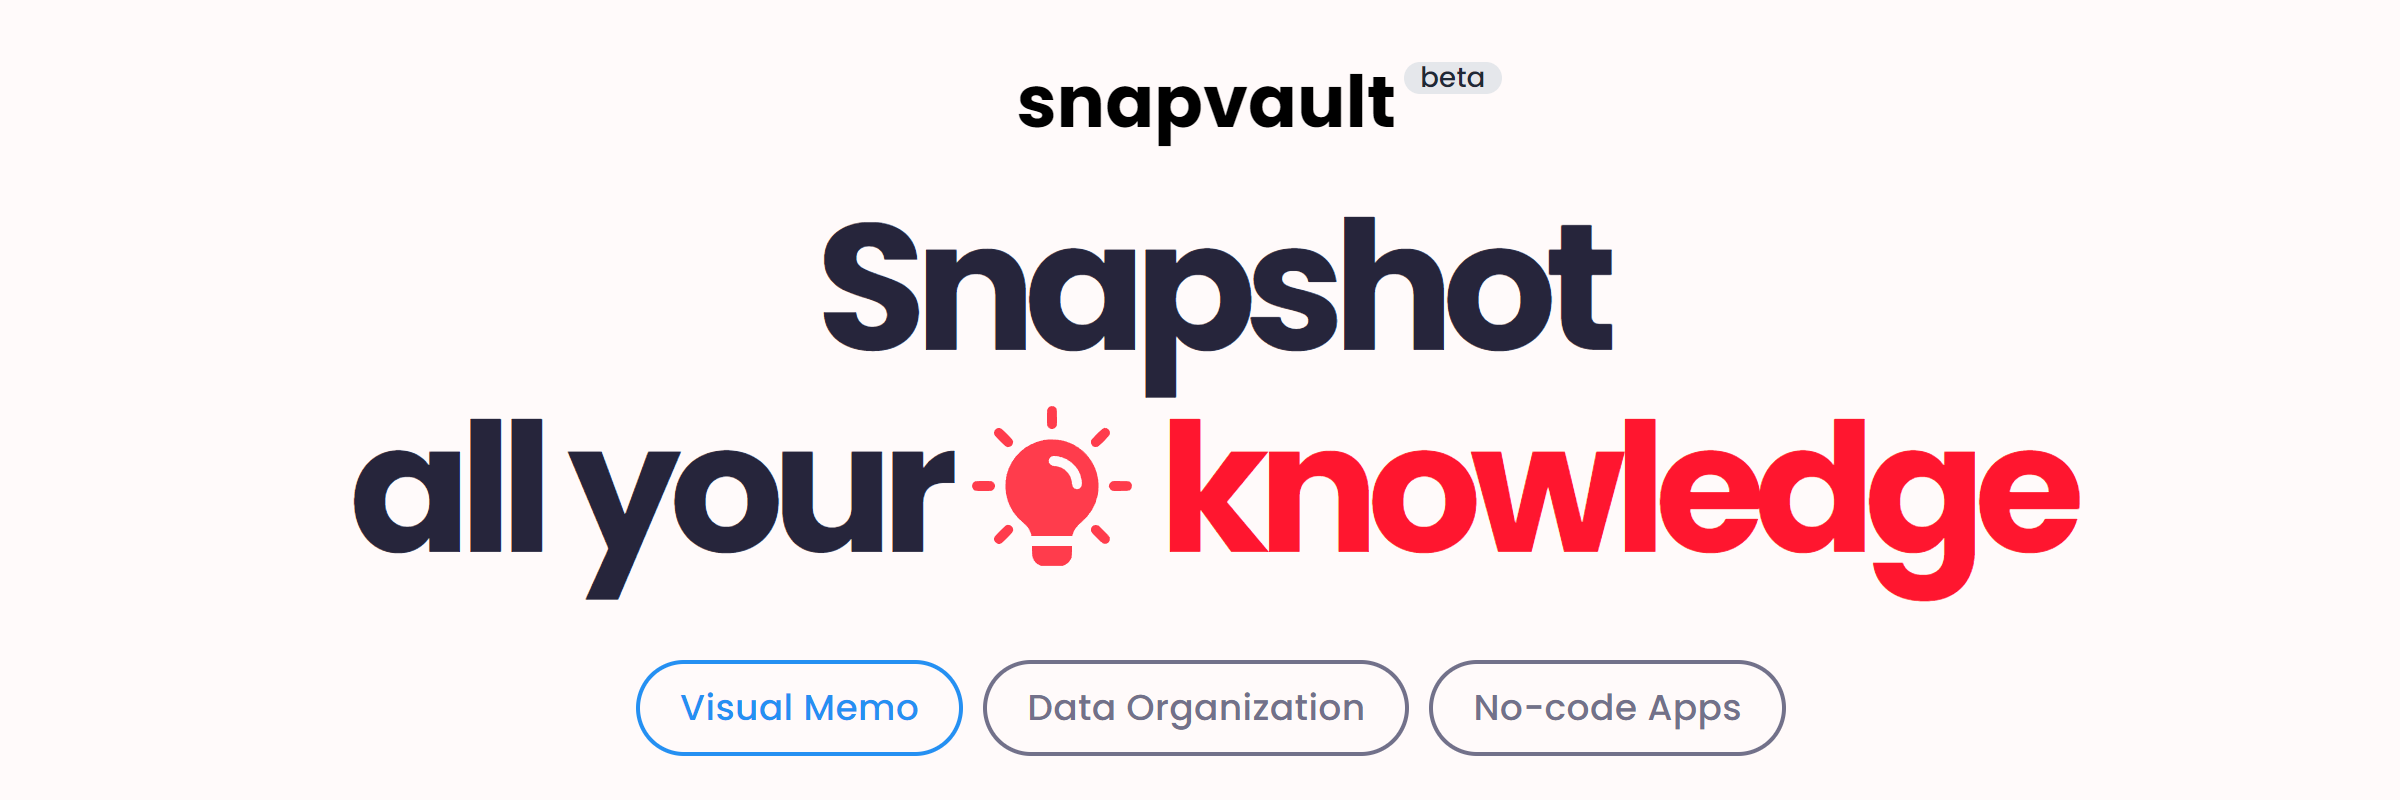 snapvault - The easiest way to build knowledge base with snapshots